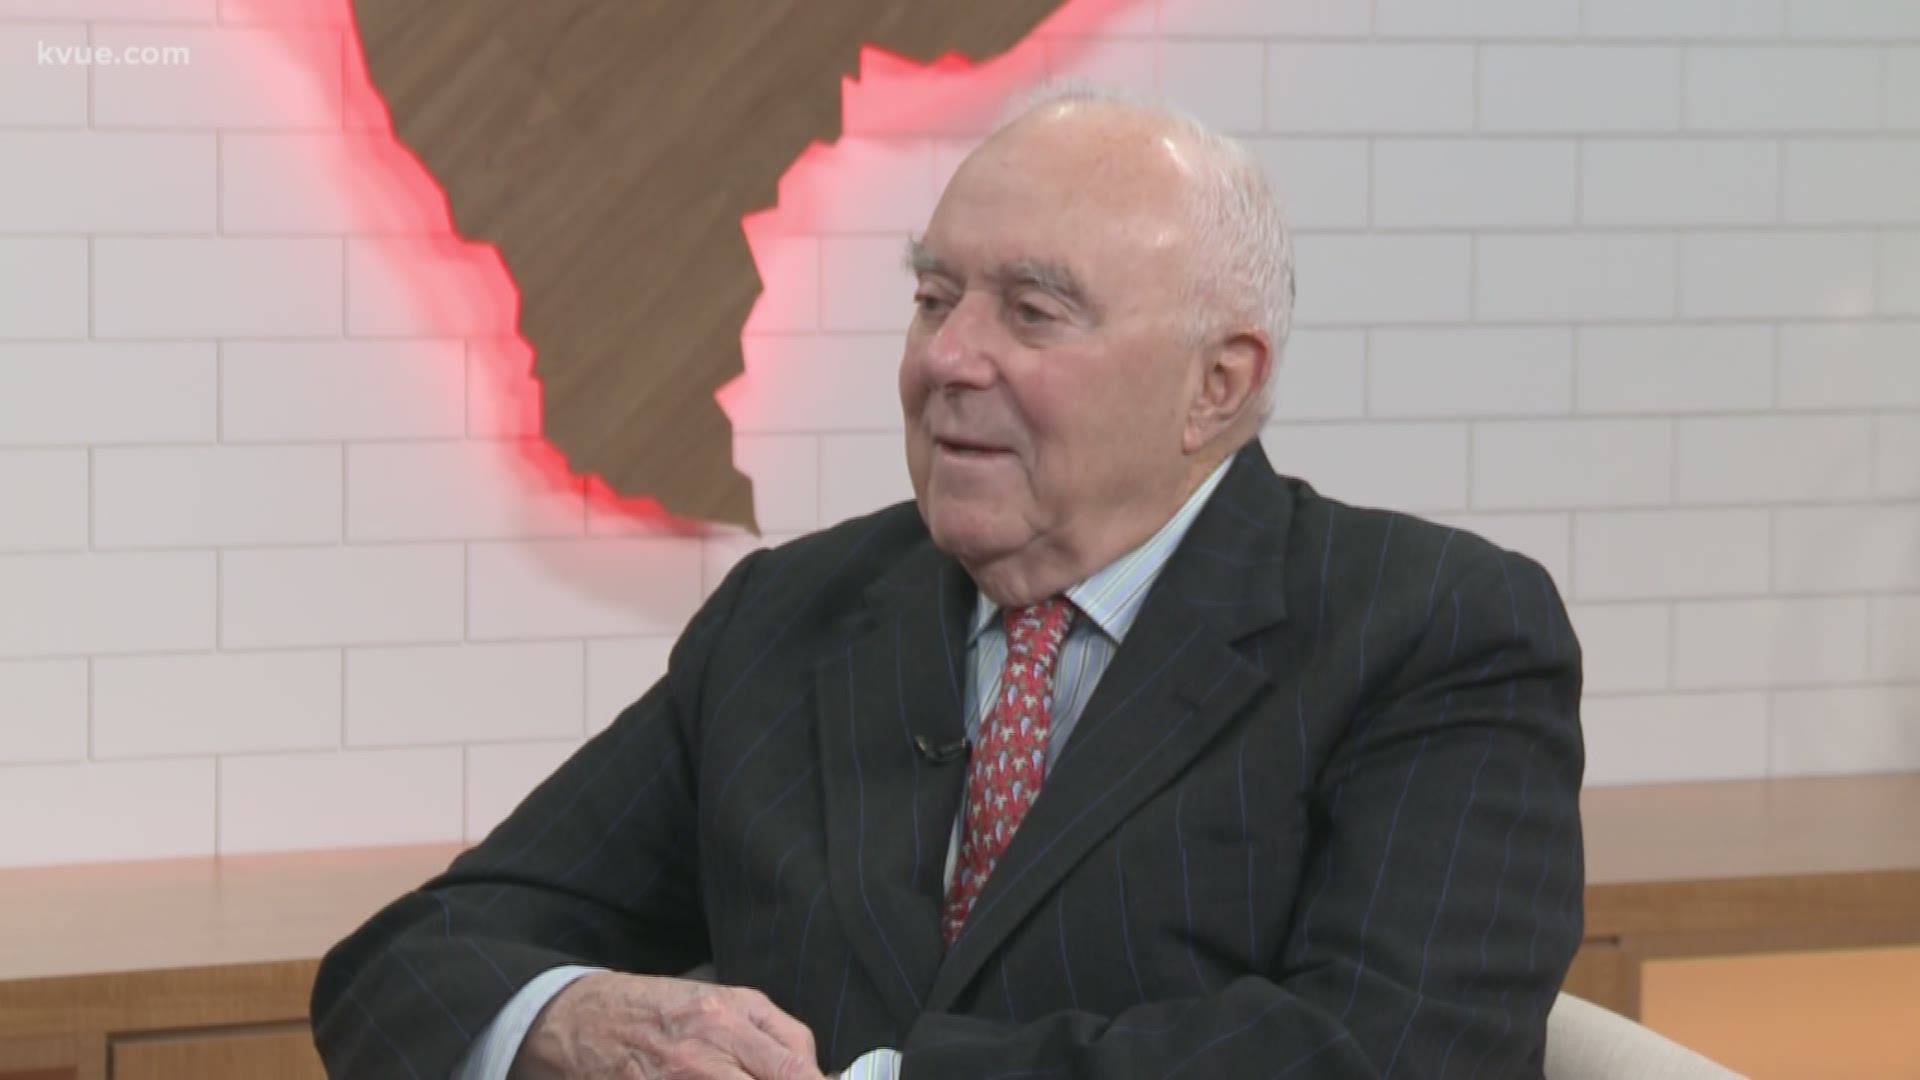 A member of former Presidents Lyndon B. Johnson and Jimmy Carter's administrations was in Austin, sharing his insights on Washington. In Texas This Week -- Ashley Goudeau sits down with Joseph Califano to talk politics and his new book "Our Damaged Democr